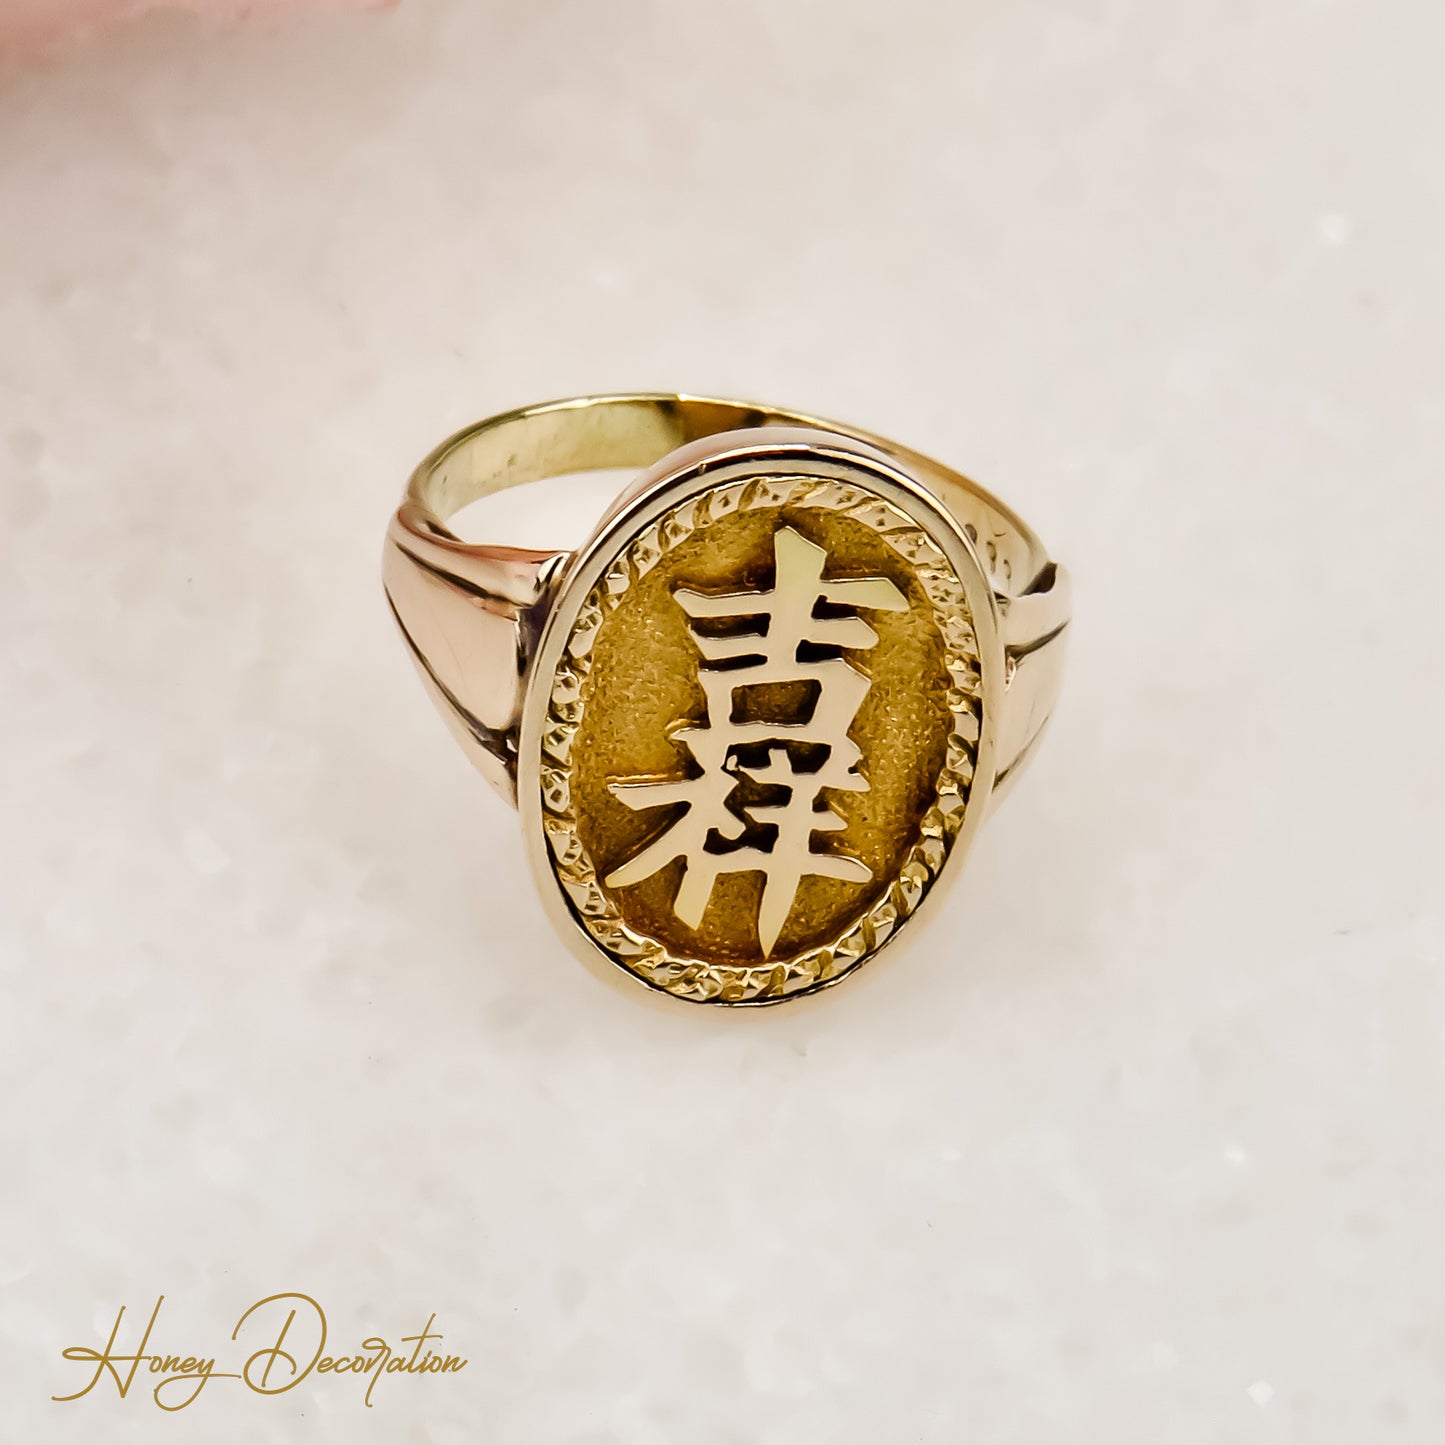 Glücks seal ring with Chinese characters